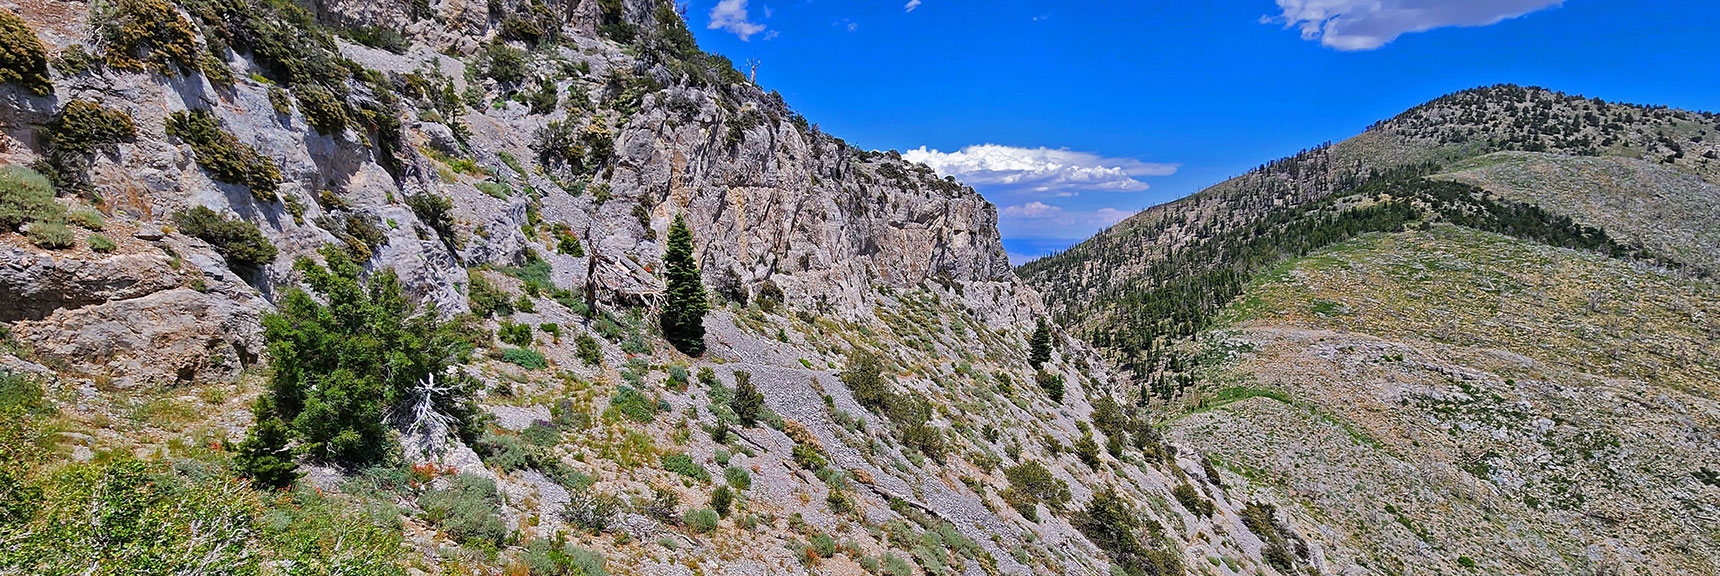 View Back Down the Cliffs to the Saddle and on Up to Harris Mountain. | Fletcher Canyon Trailhead to Harris Mountain Summit to Griffith Peak Summit Circuit Adventure | Mt. Charleston Wilderness, Nevada